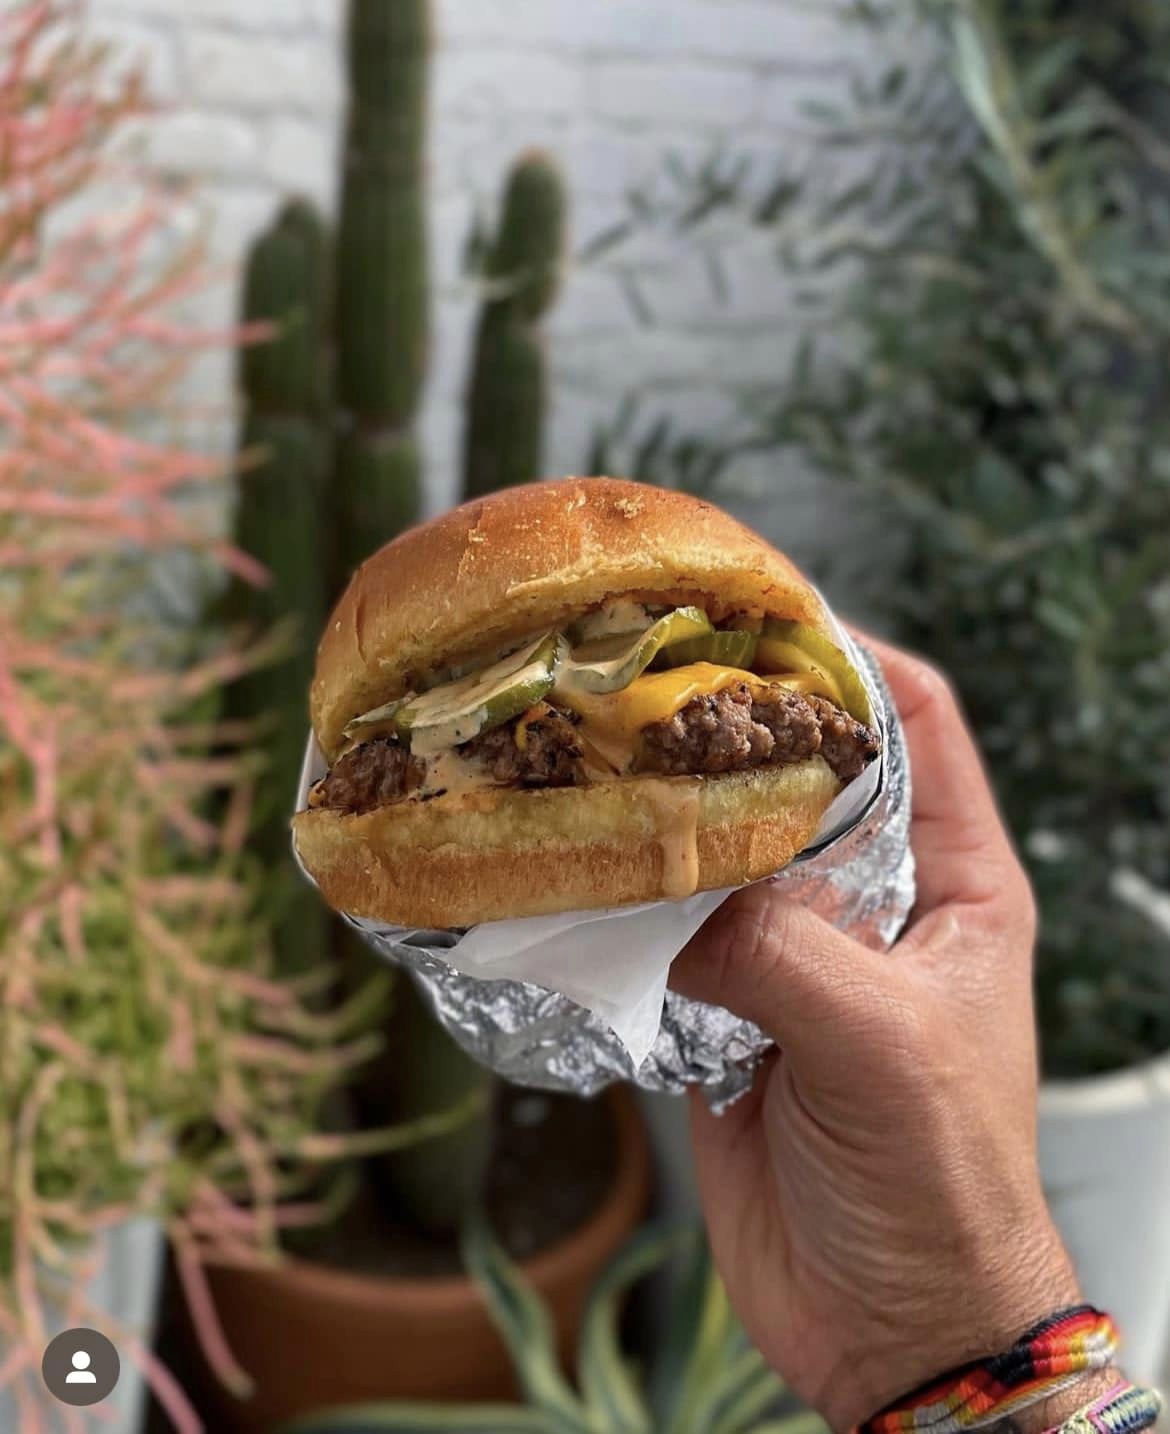 A hand holds a burger with cheese from SolRad burger in Montebello, California.